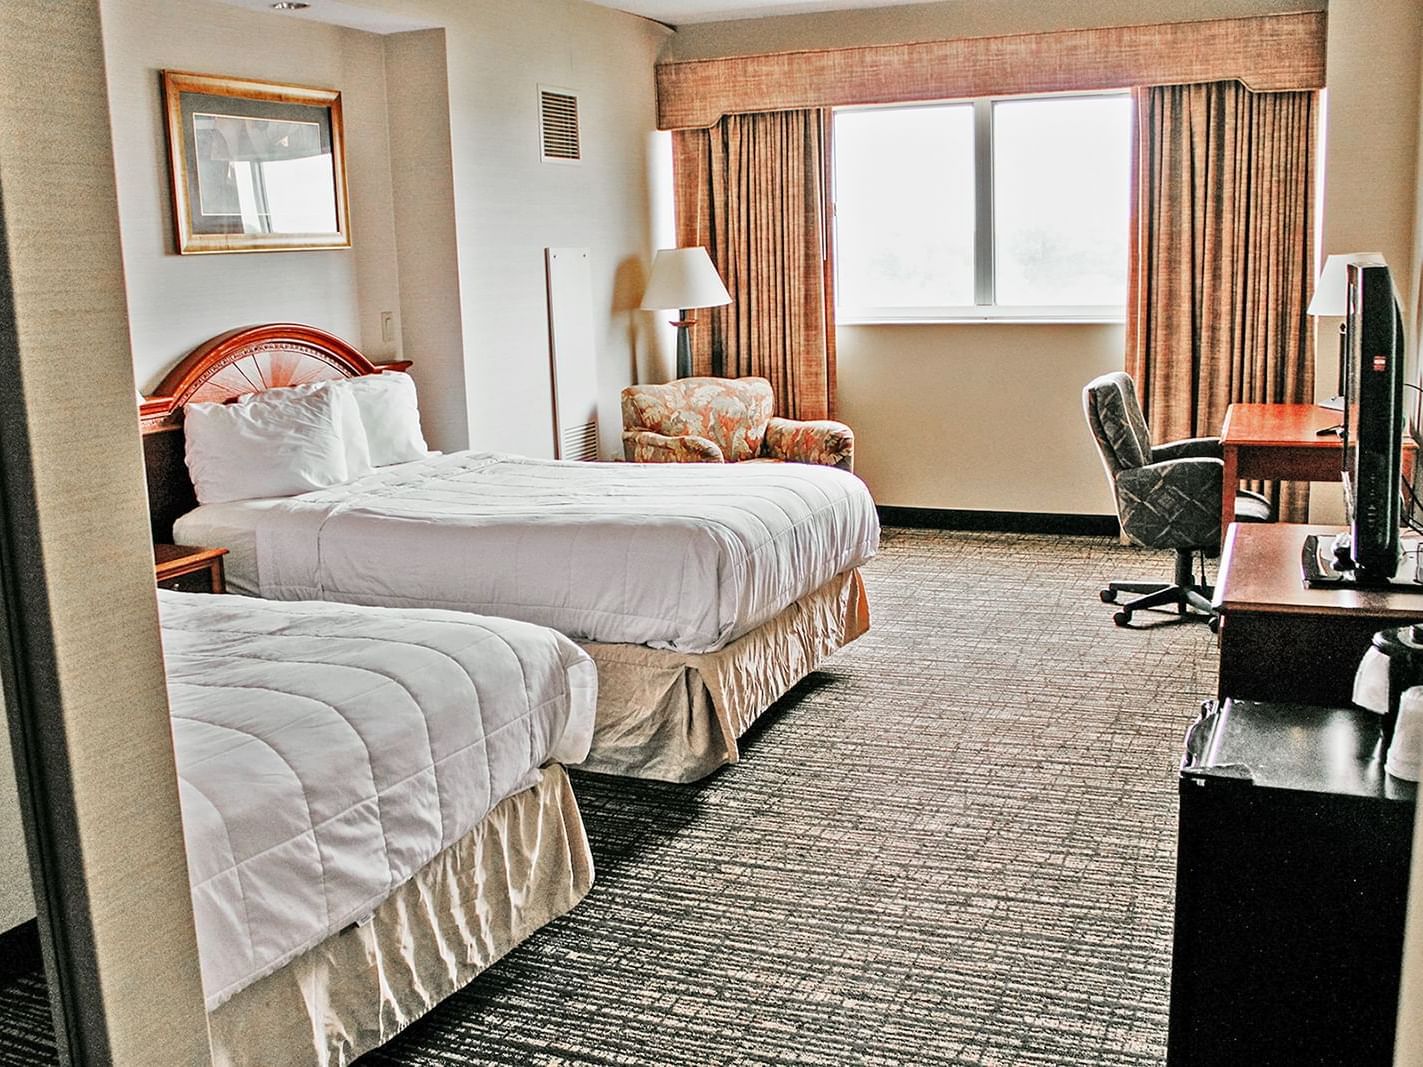 Our Accessible Double Guest Room is spacious and equipped with two full size beds, standard amenities, and a refrigerator.